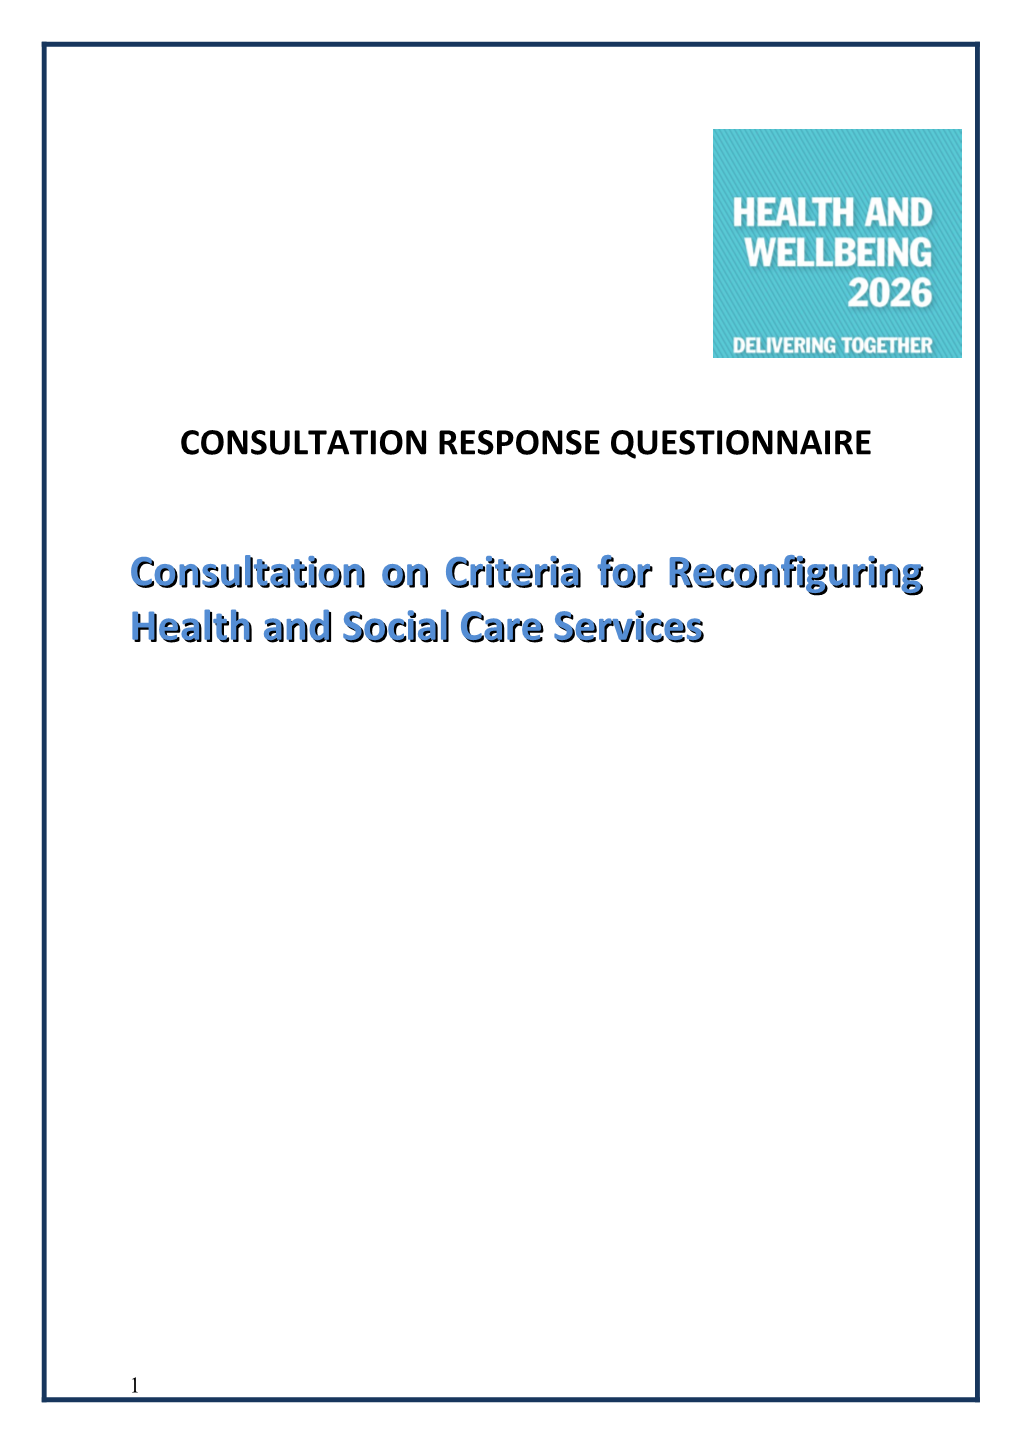 Consultation on Criteria for Reconfiguring Health and Social Care Services